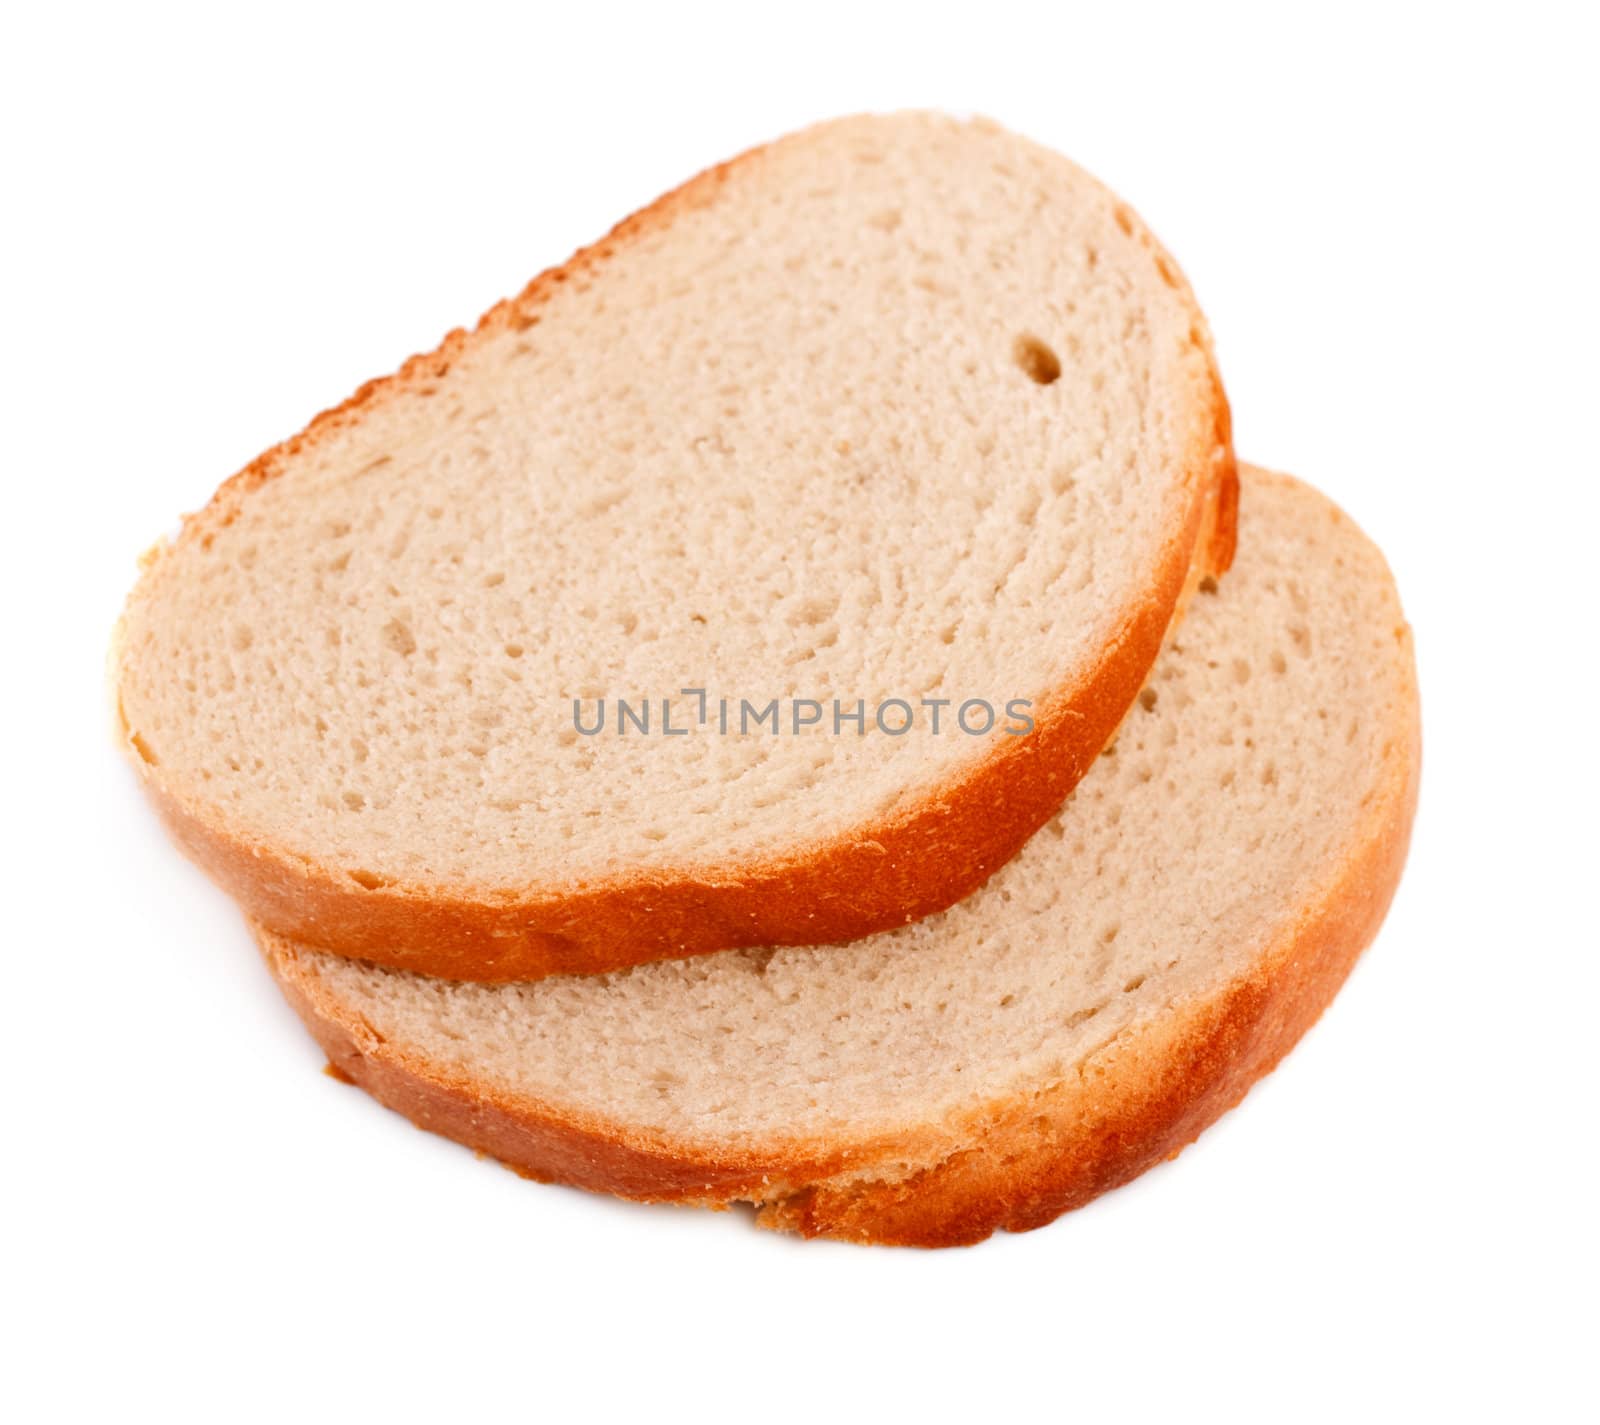 Fresh sliced bread isolated on a white background